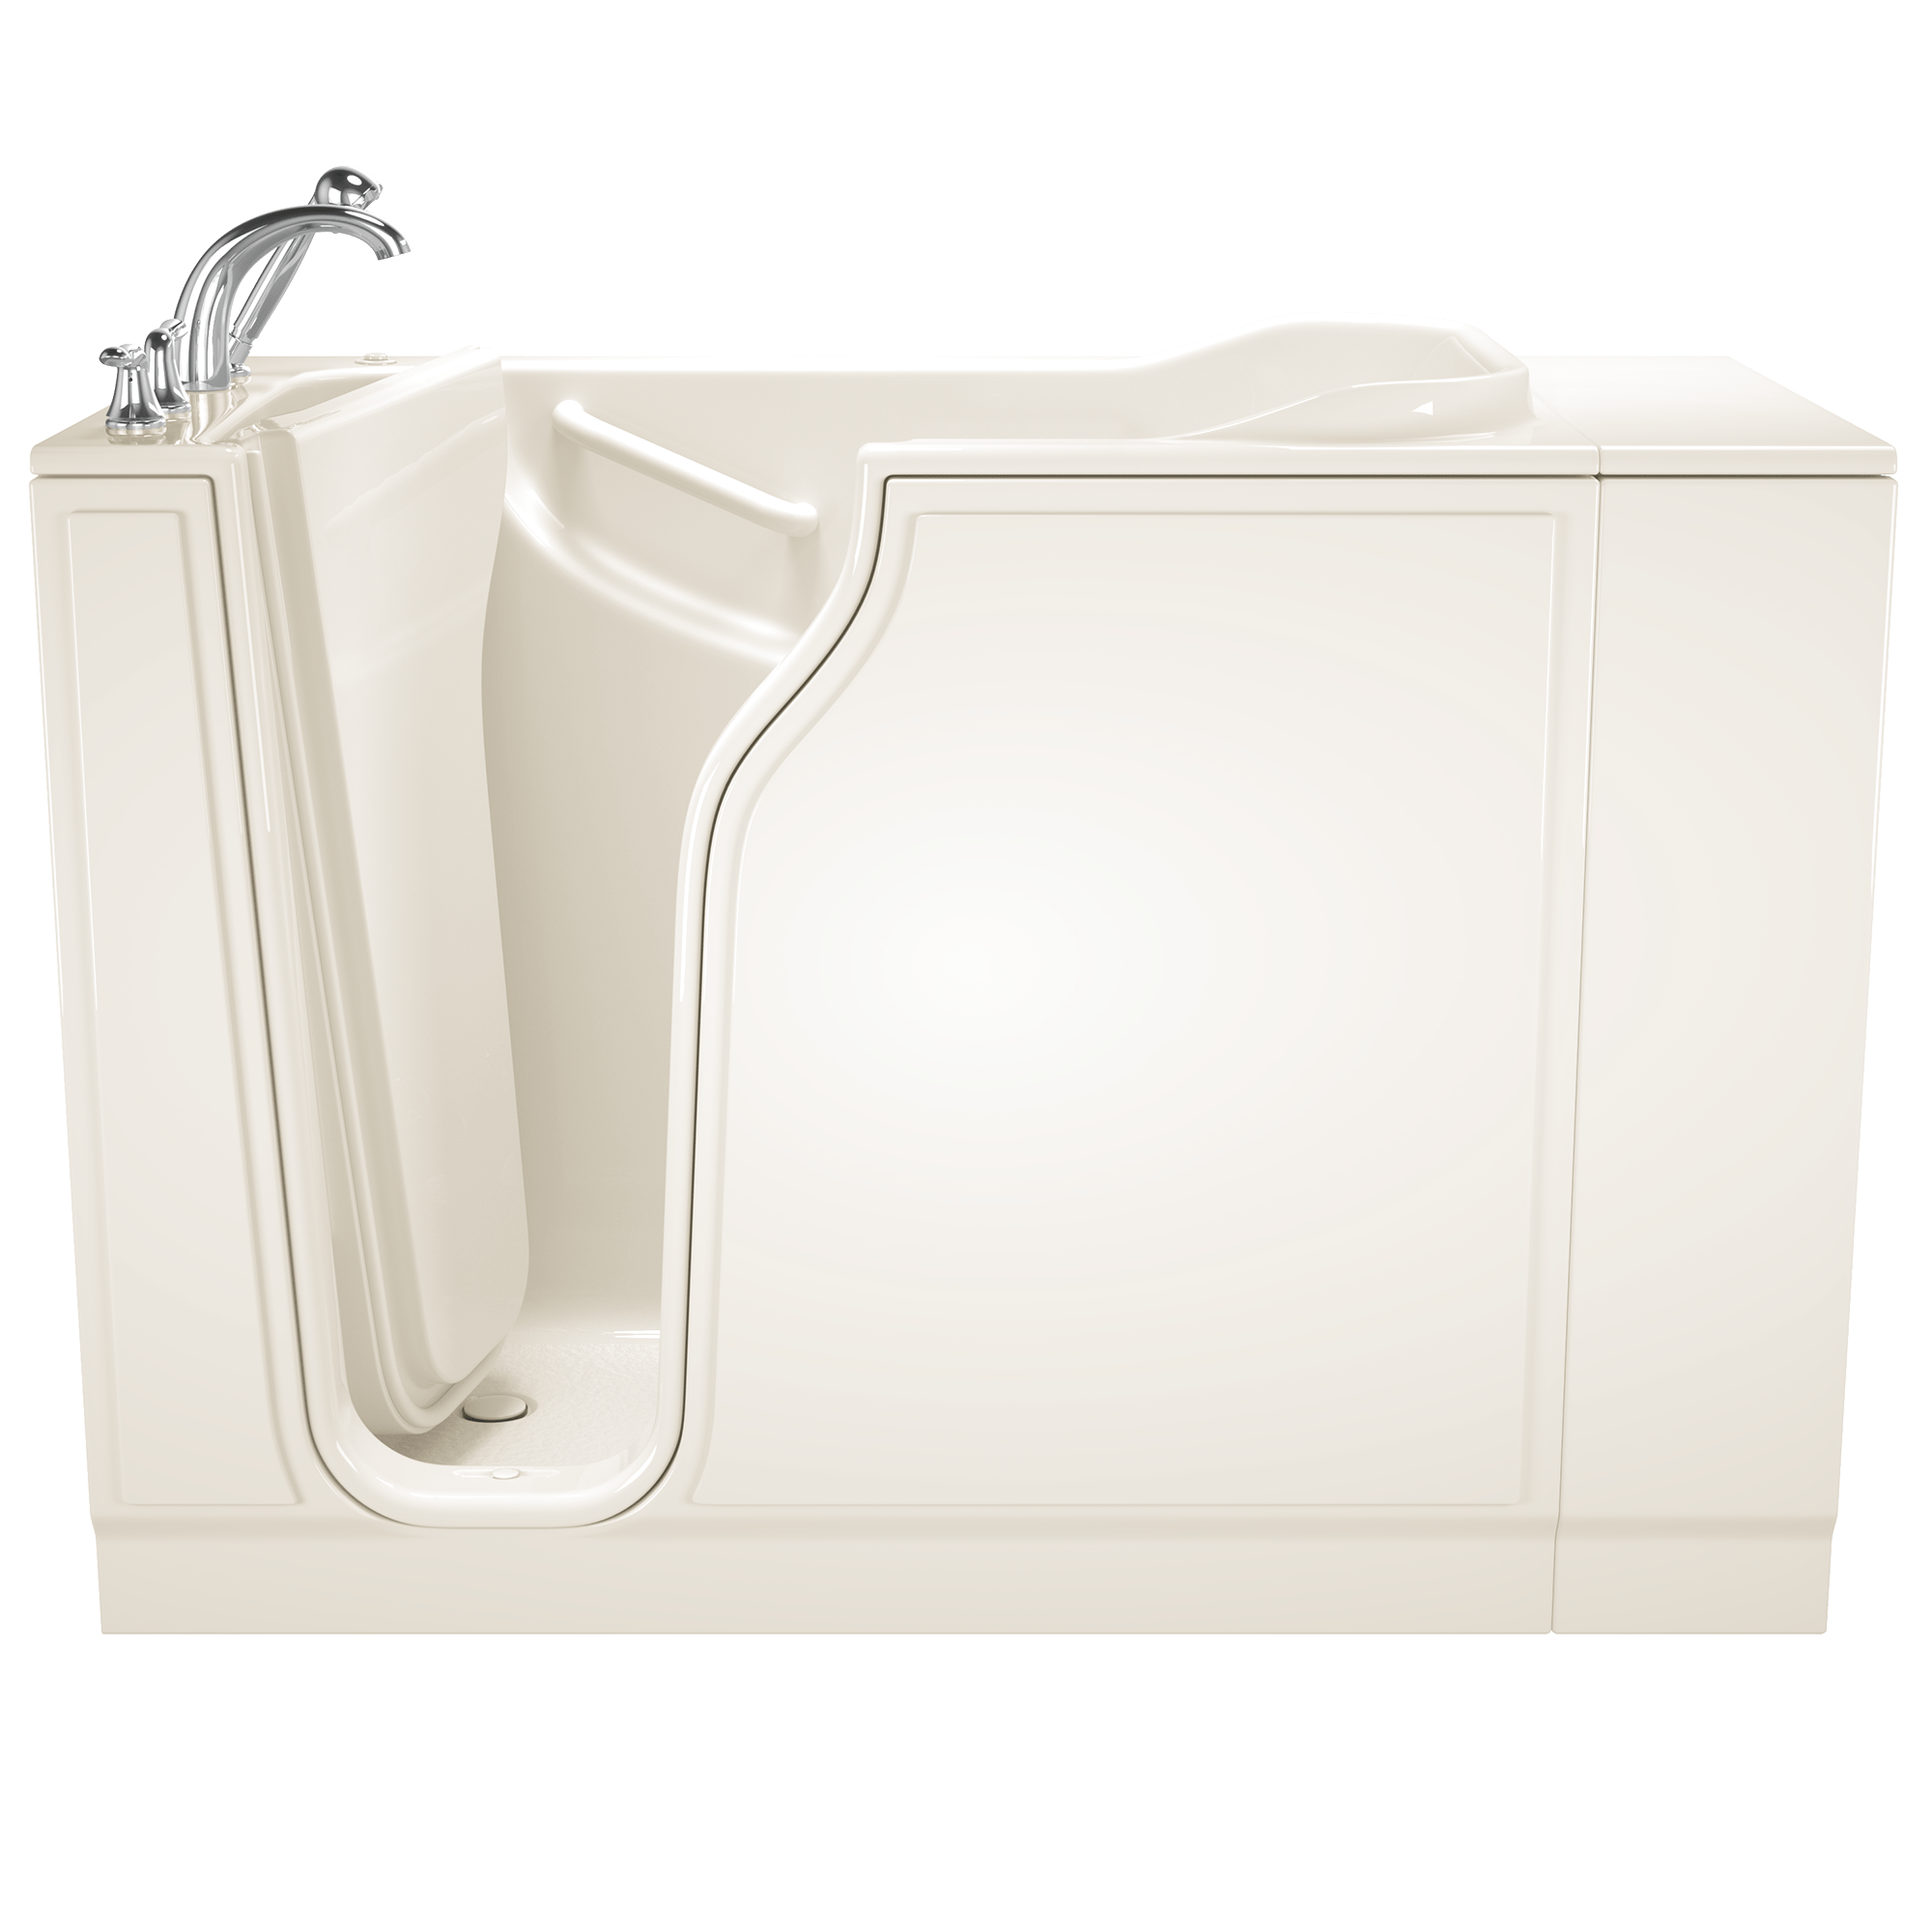 Gelcoat Entry Series 52 x 30 Inch Walk In Tub With Air Spa System - Left Hand Drain With Faucet BISCUIT